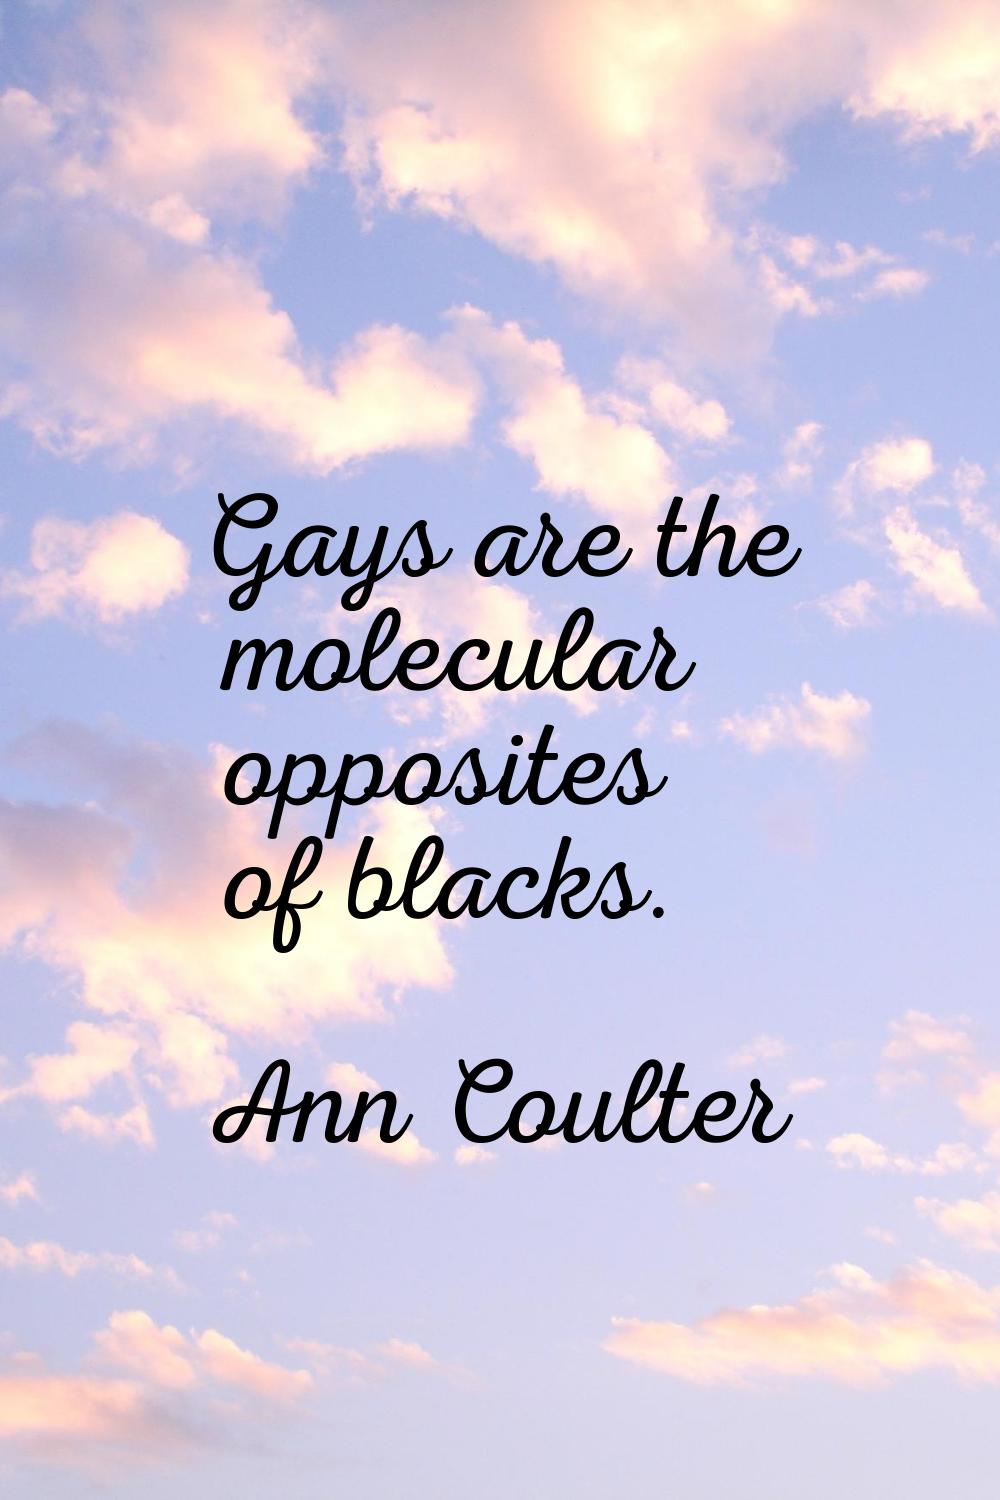 Gays are the molecular opposites of blacks.